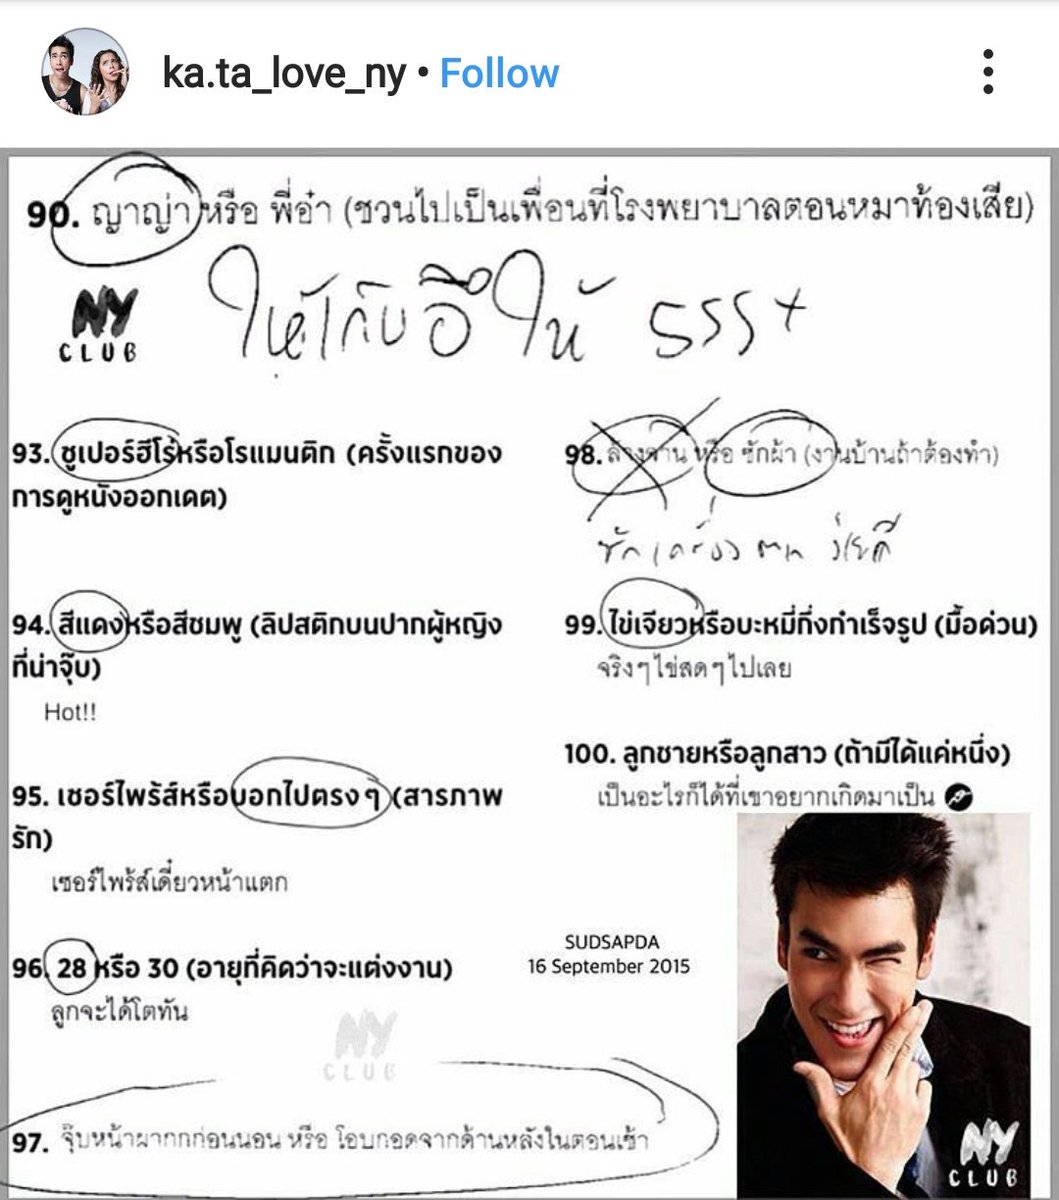 Backreading NY's history to dig out more details of their past and got to this written interview with Na. Answer for Q96 is so fin! Between 28 and 30 he chose 28 and that is coming this year in Dec, guys!Cr to ka.ta_love_ny for the translation #NadechYaya  #ณเดชน์ญาญ่า